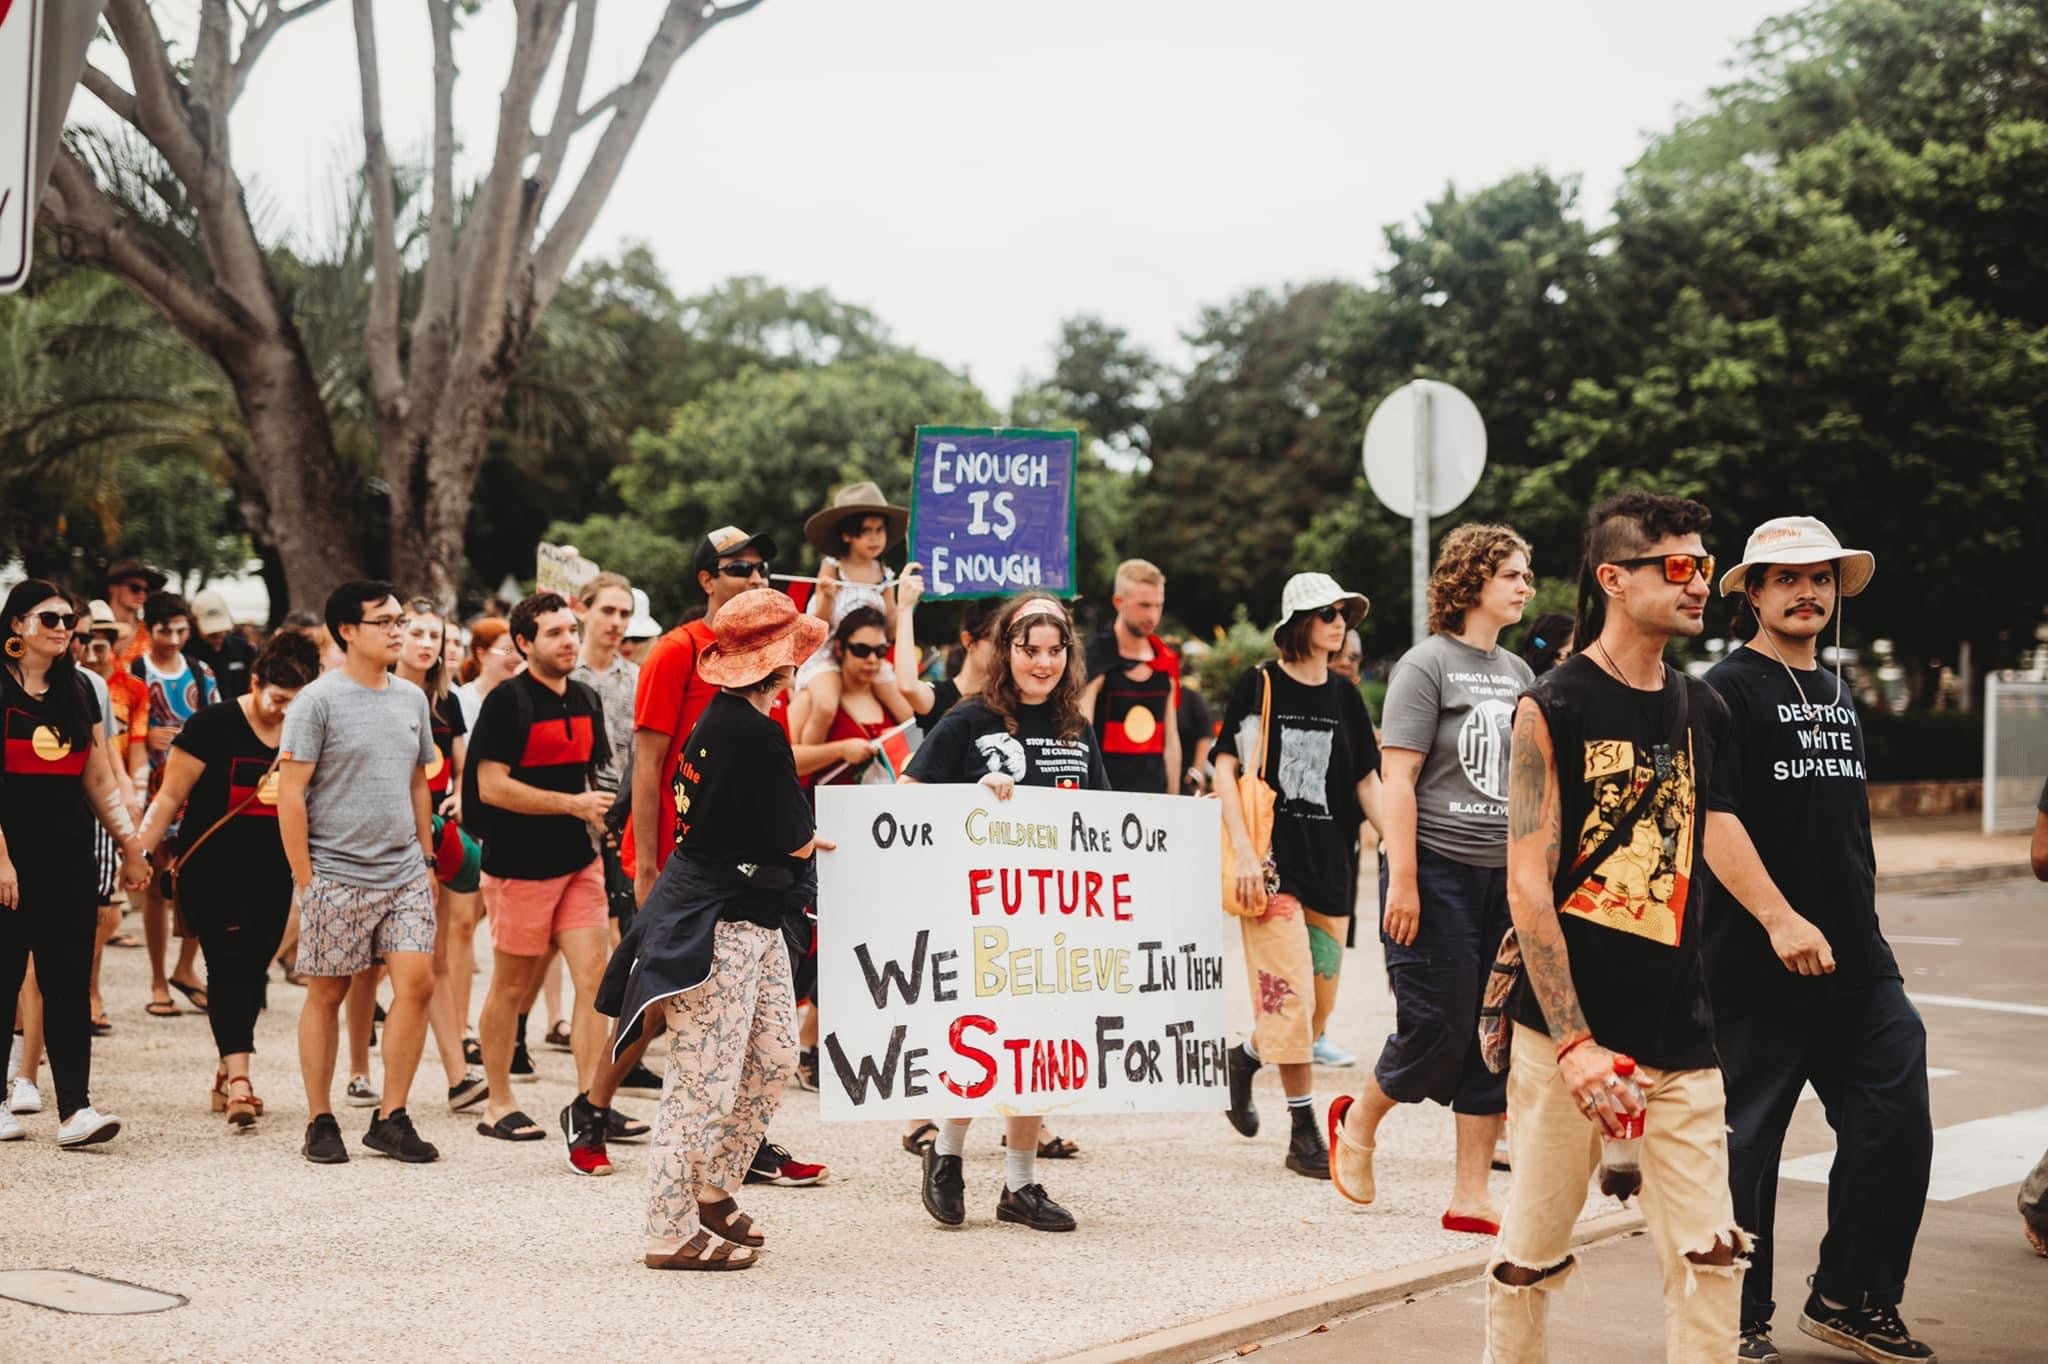 A photo from the Darwin BLM protest. A crowd of people walking on the road. A man wears a shirt that reads "destroy white supremacy". A sign reads "enough is enough". Some people are smiling other are serious.